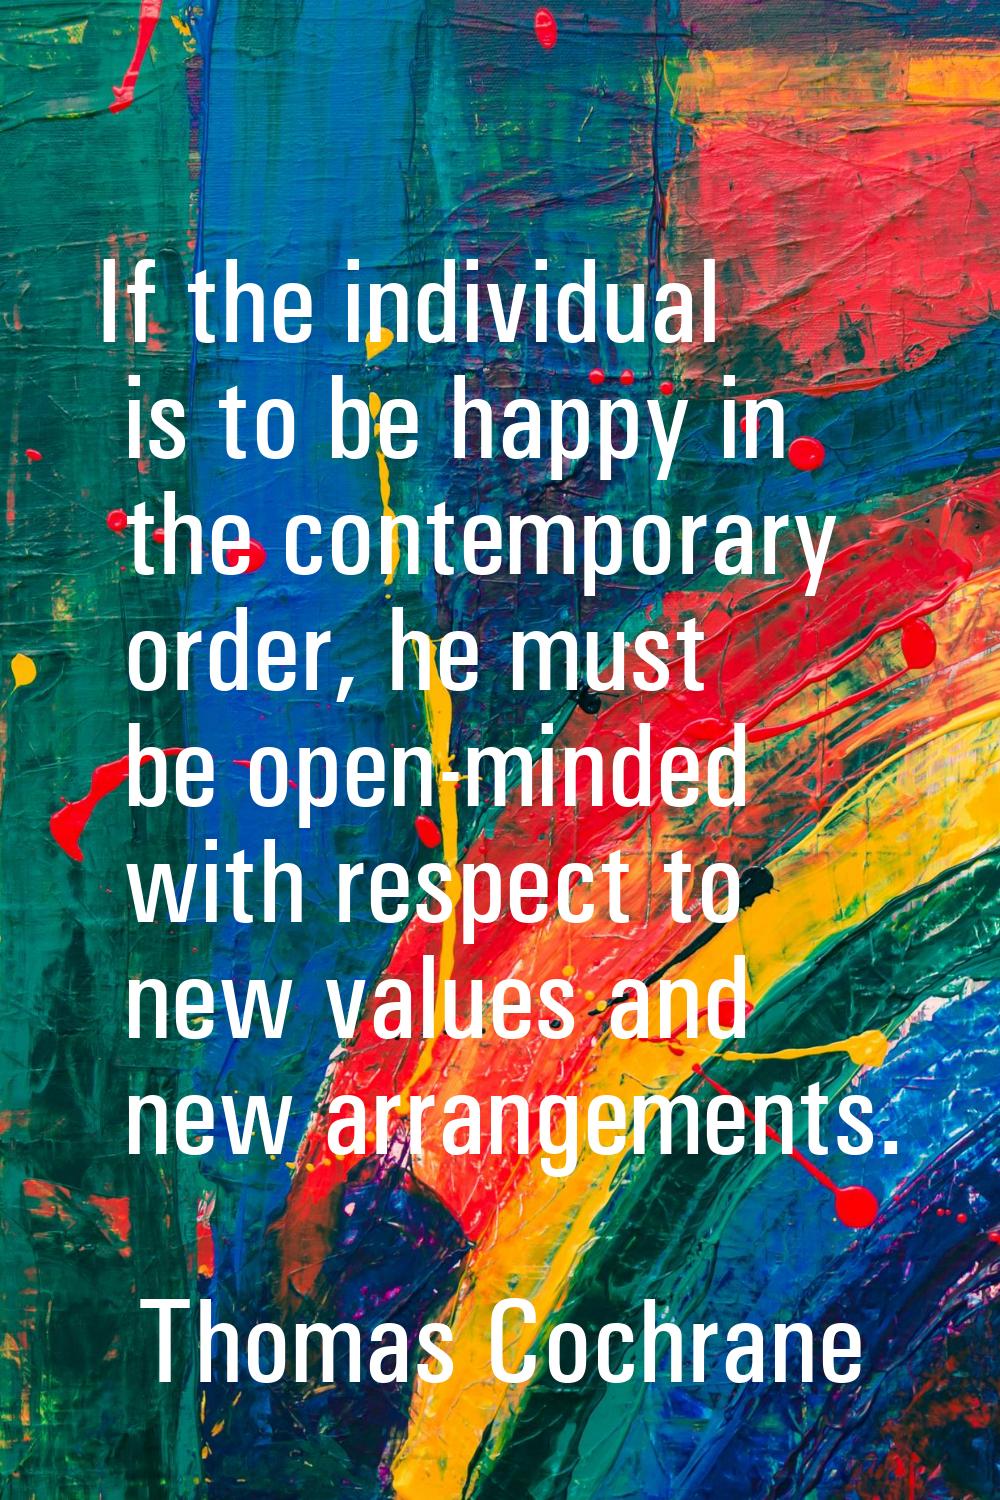 If the individual is to be happy in the contemporary order, he must be open-minded with respect to 